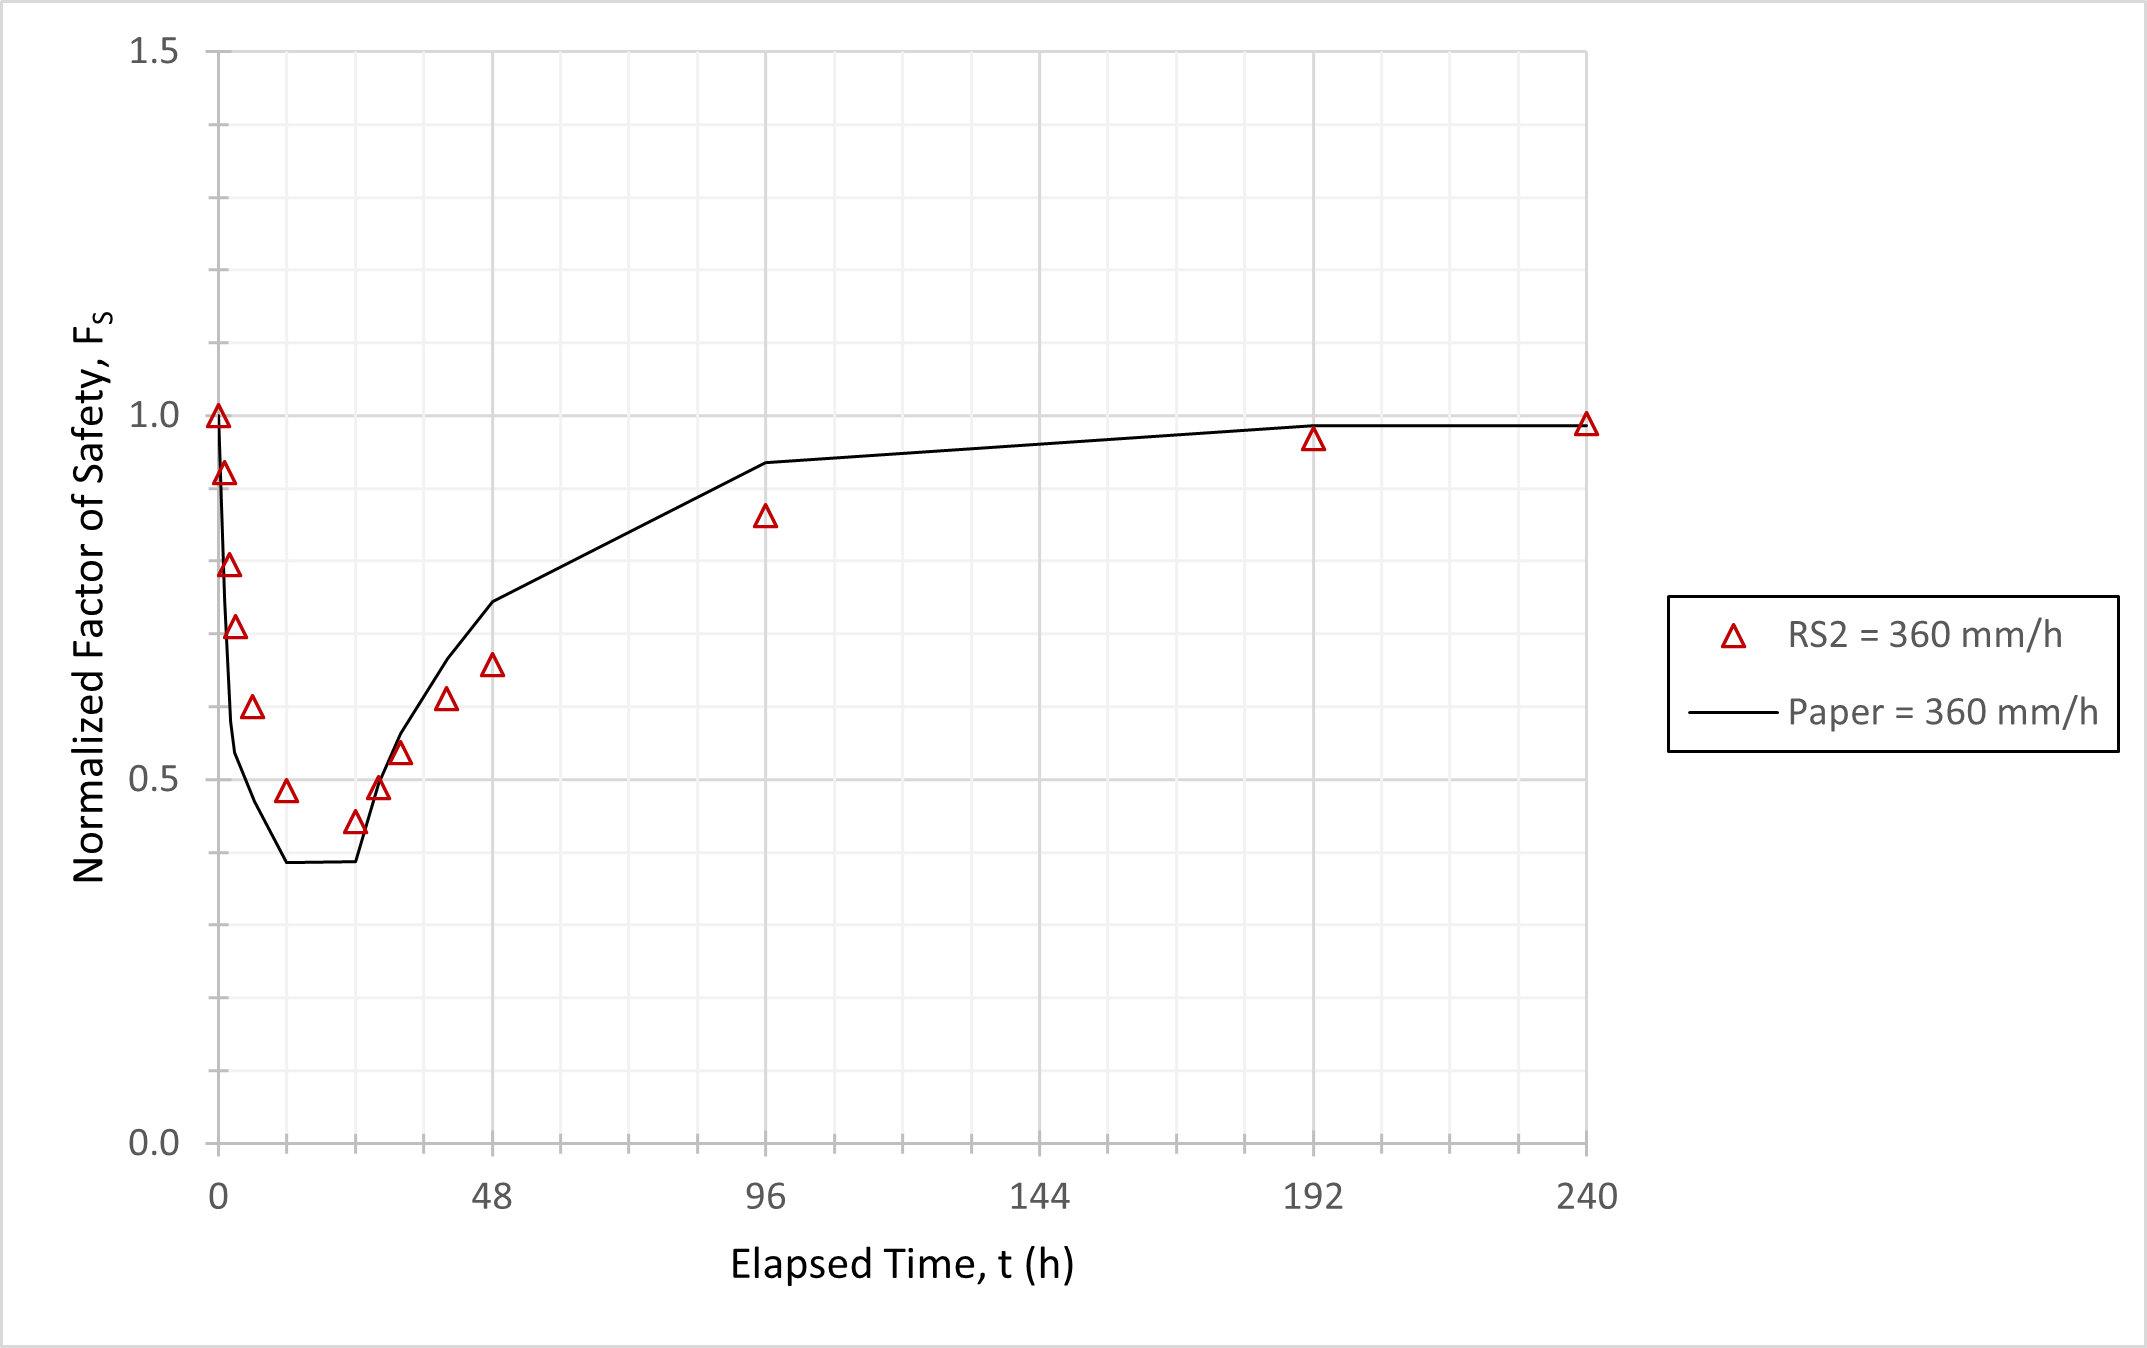 Figure 2: Variation of Normalized Factor of Safety with Time